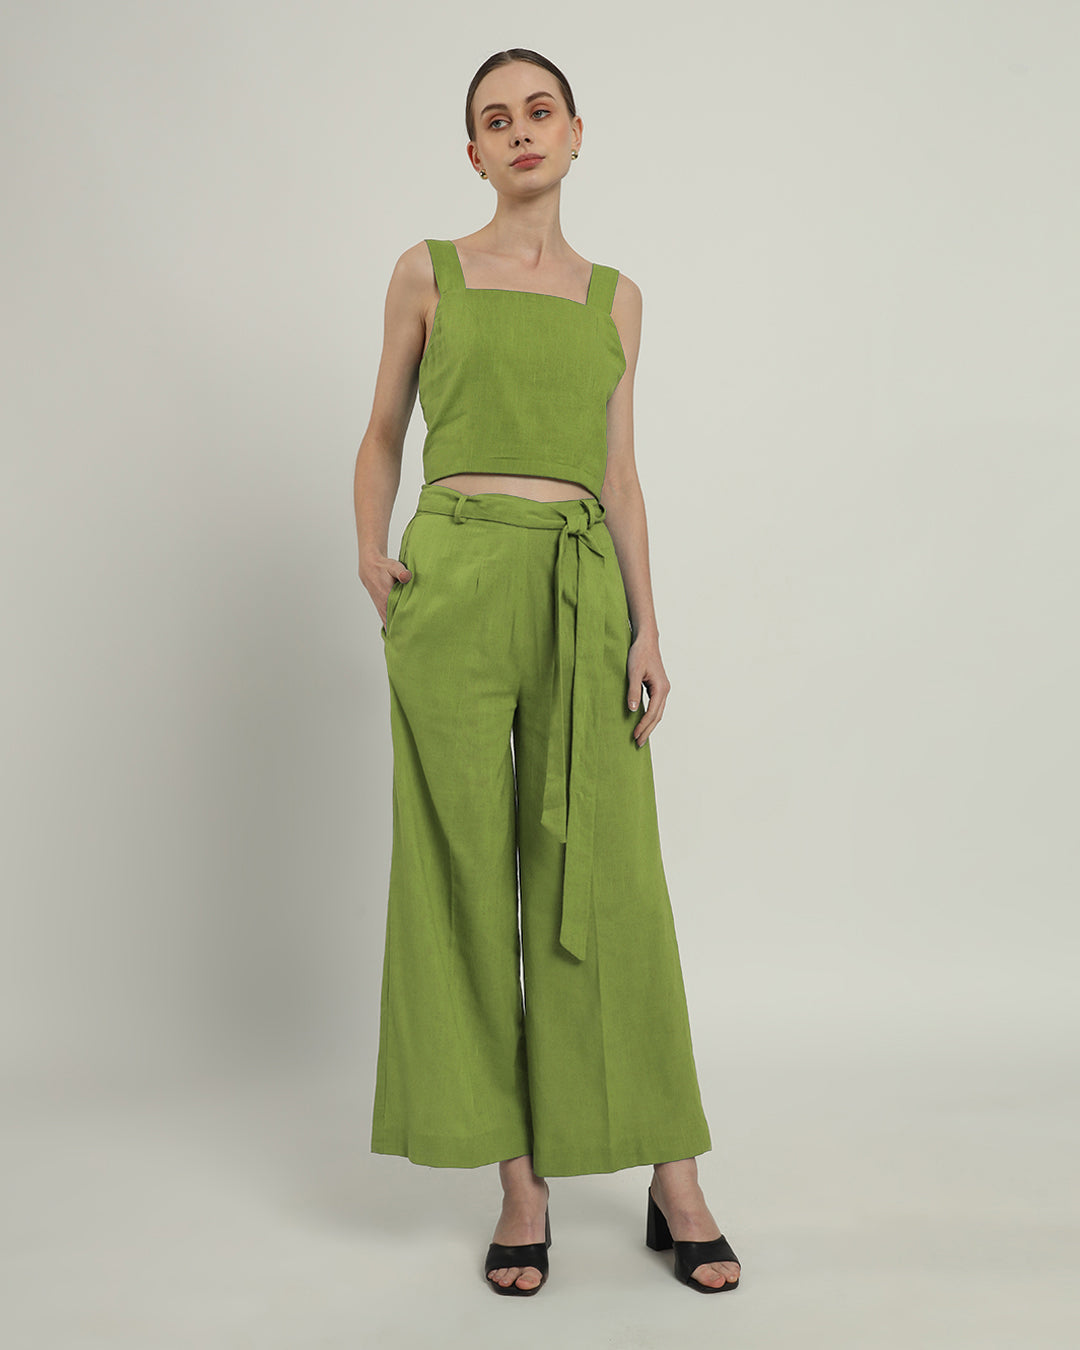 Fern Sleek Square Crop Solid Top (Without Bottoms)